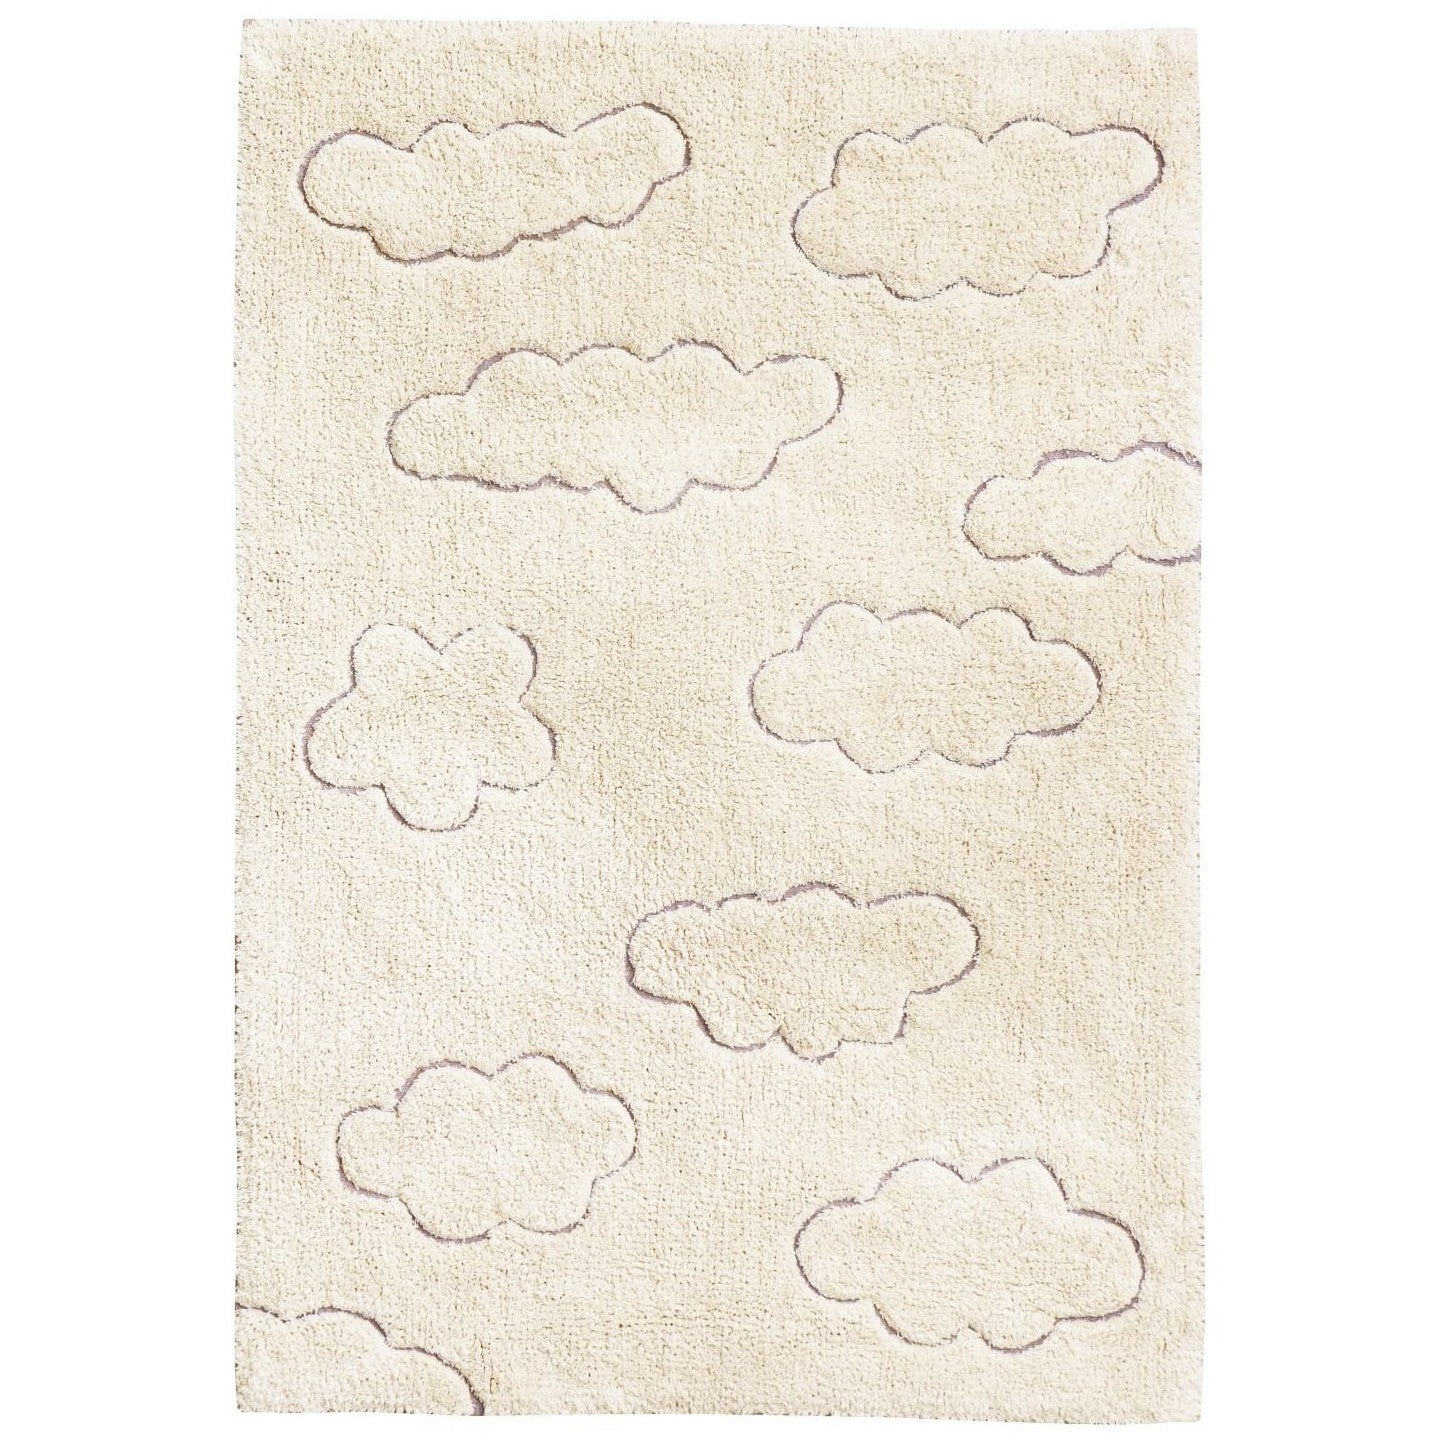 Lorena Canals washable rug Cycled Clouds, three sizes